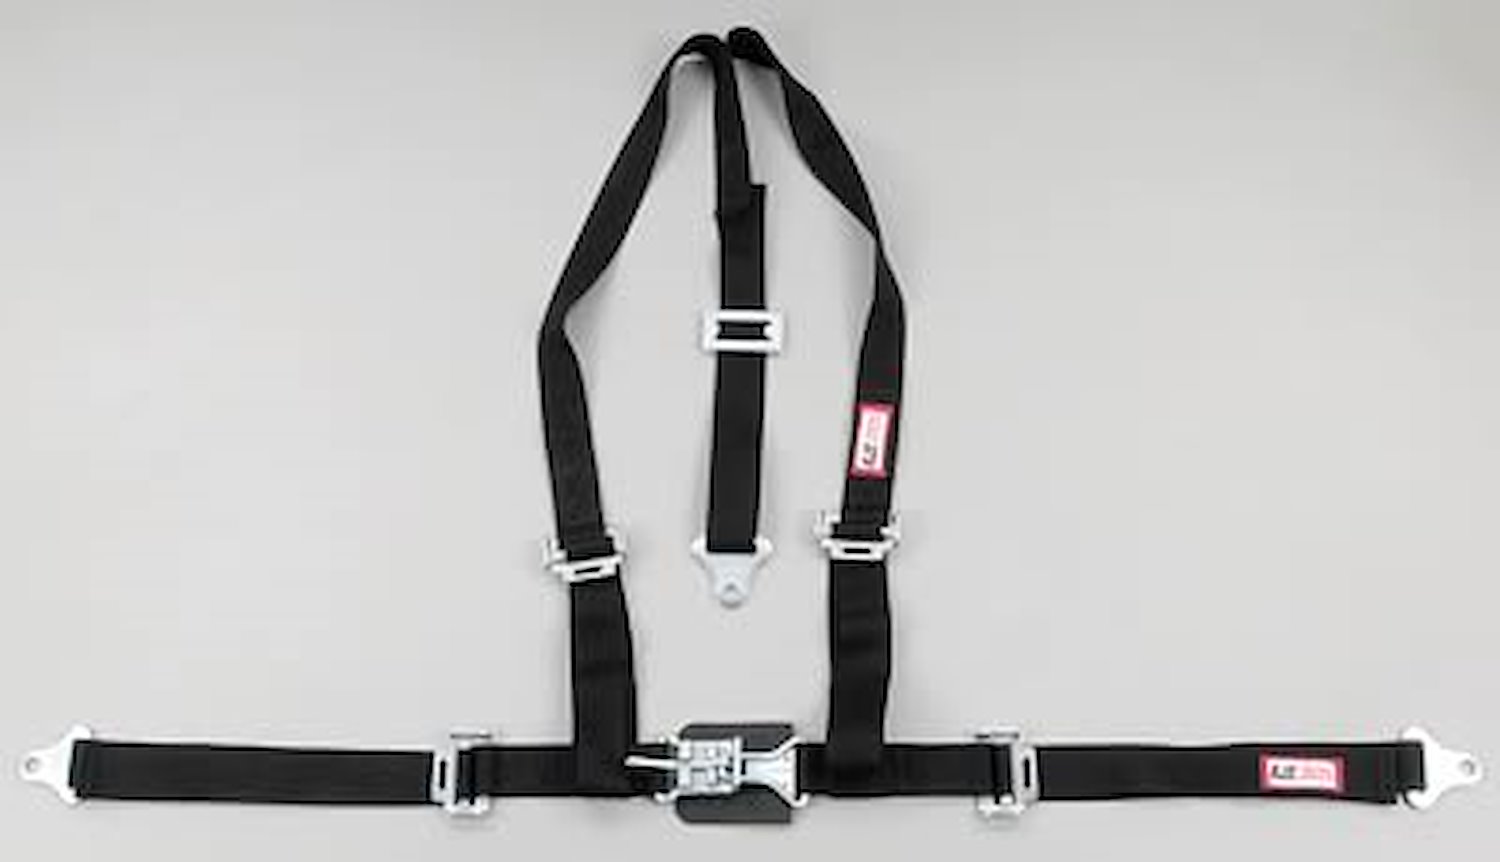 NON-SFI L&L HARNESS 2 PULL UP Lap Belt BOLT SEWN IN 2 S.H. Y FLOOR Mount w/STERNUM STRAP WRAP/BOLT RED